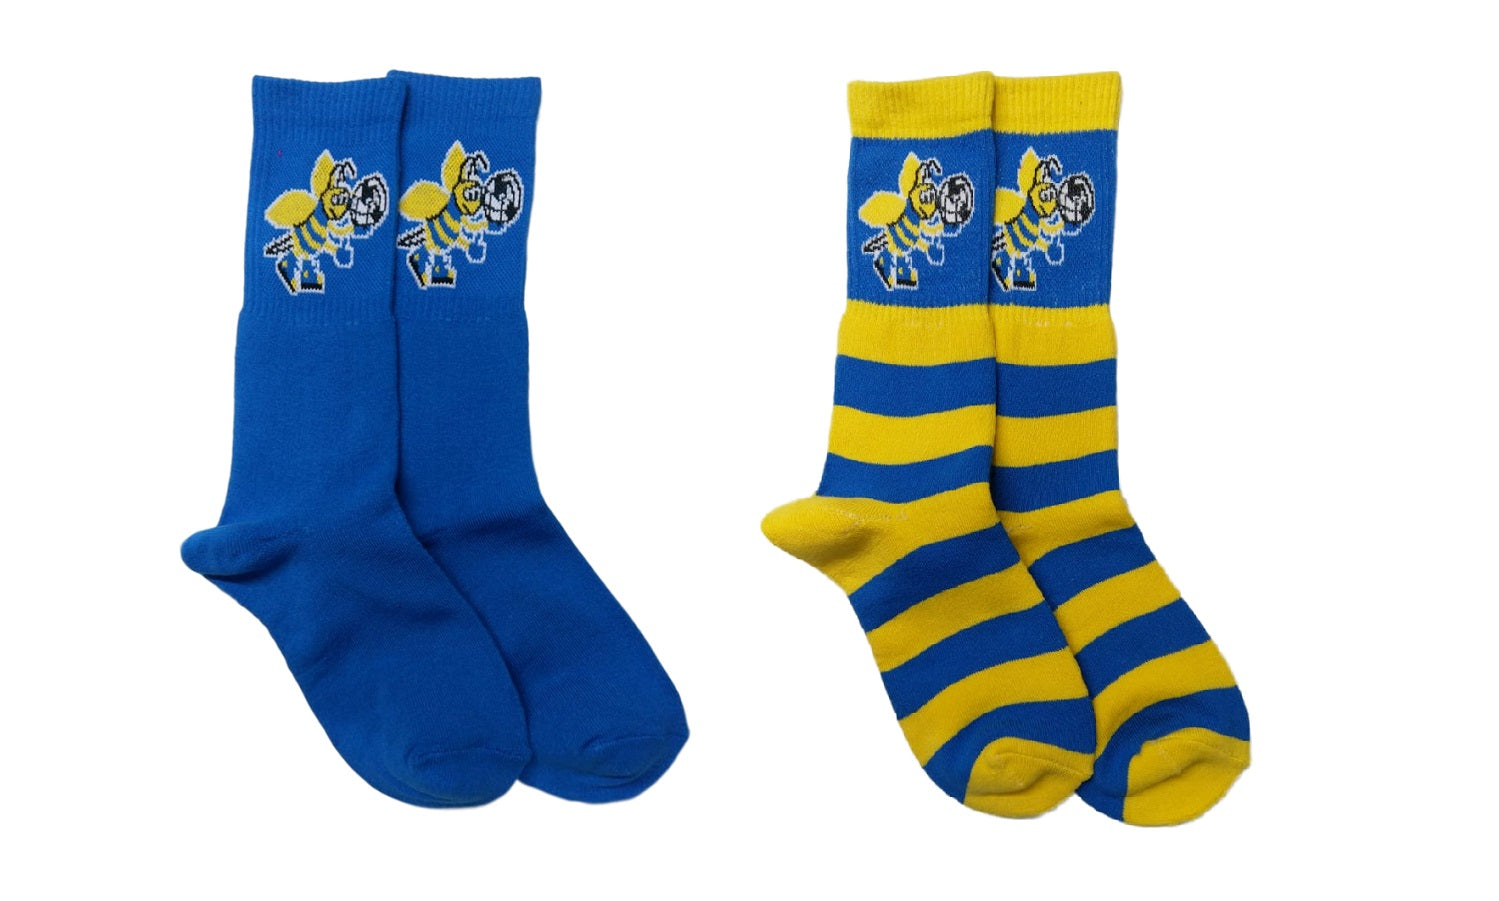 Sock Pictures – Sock Concepts